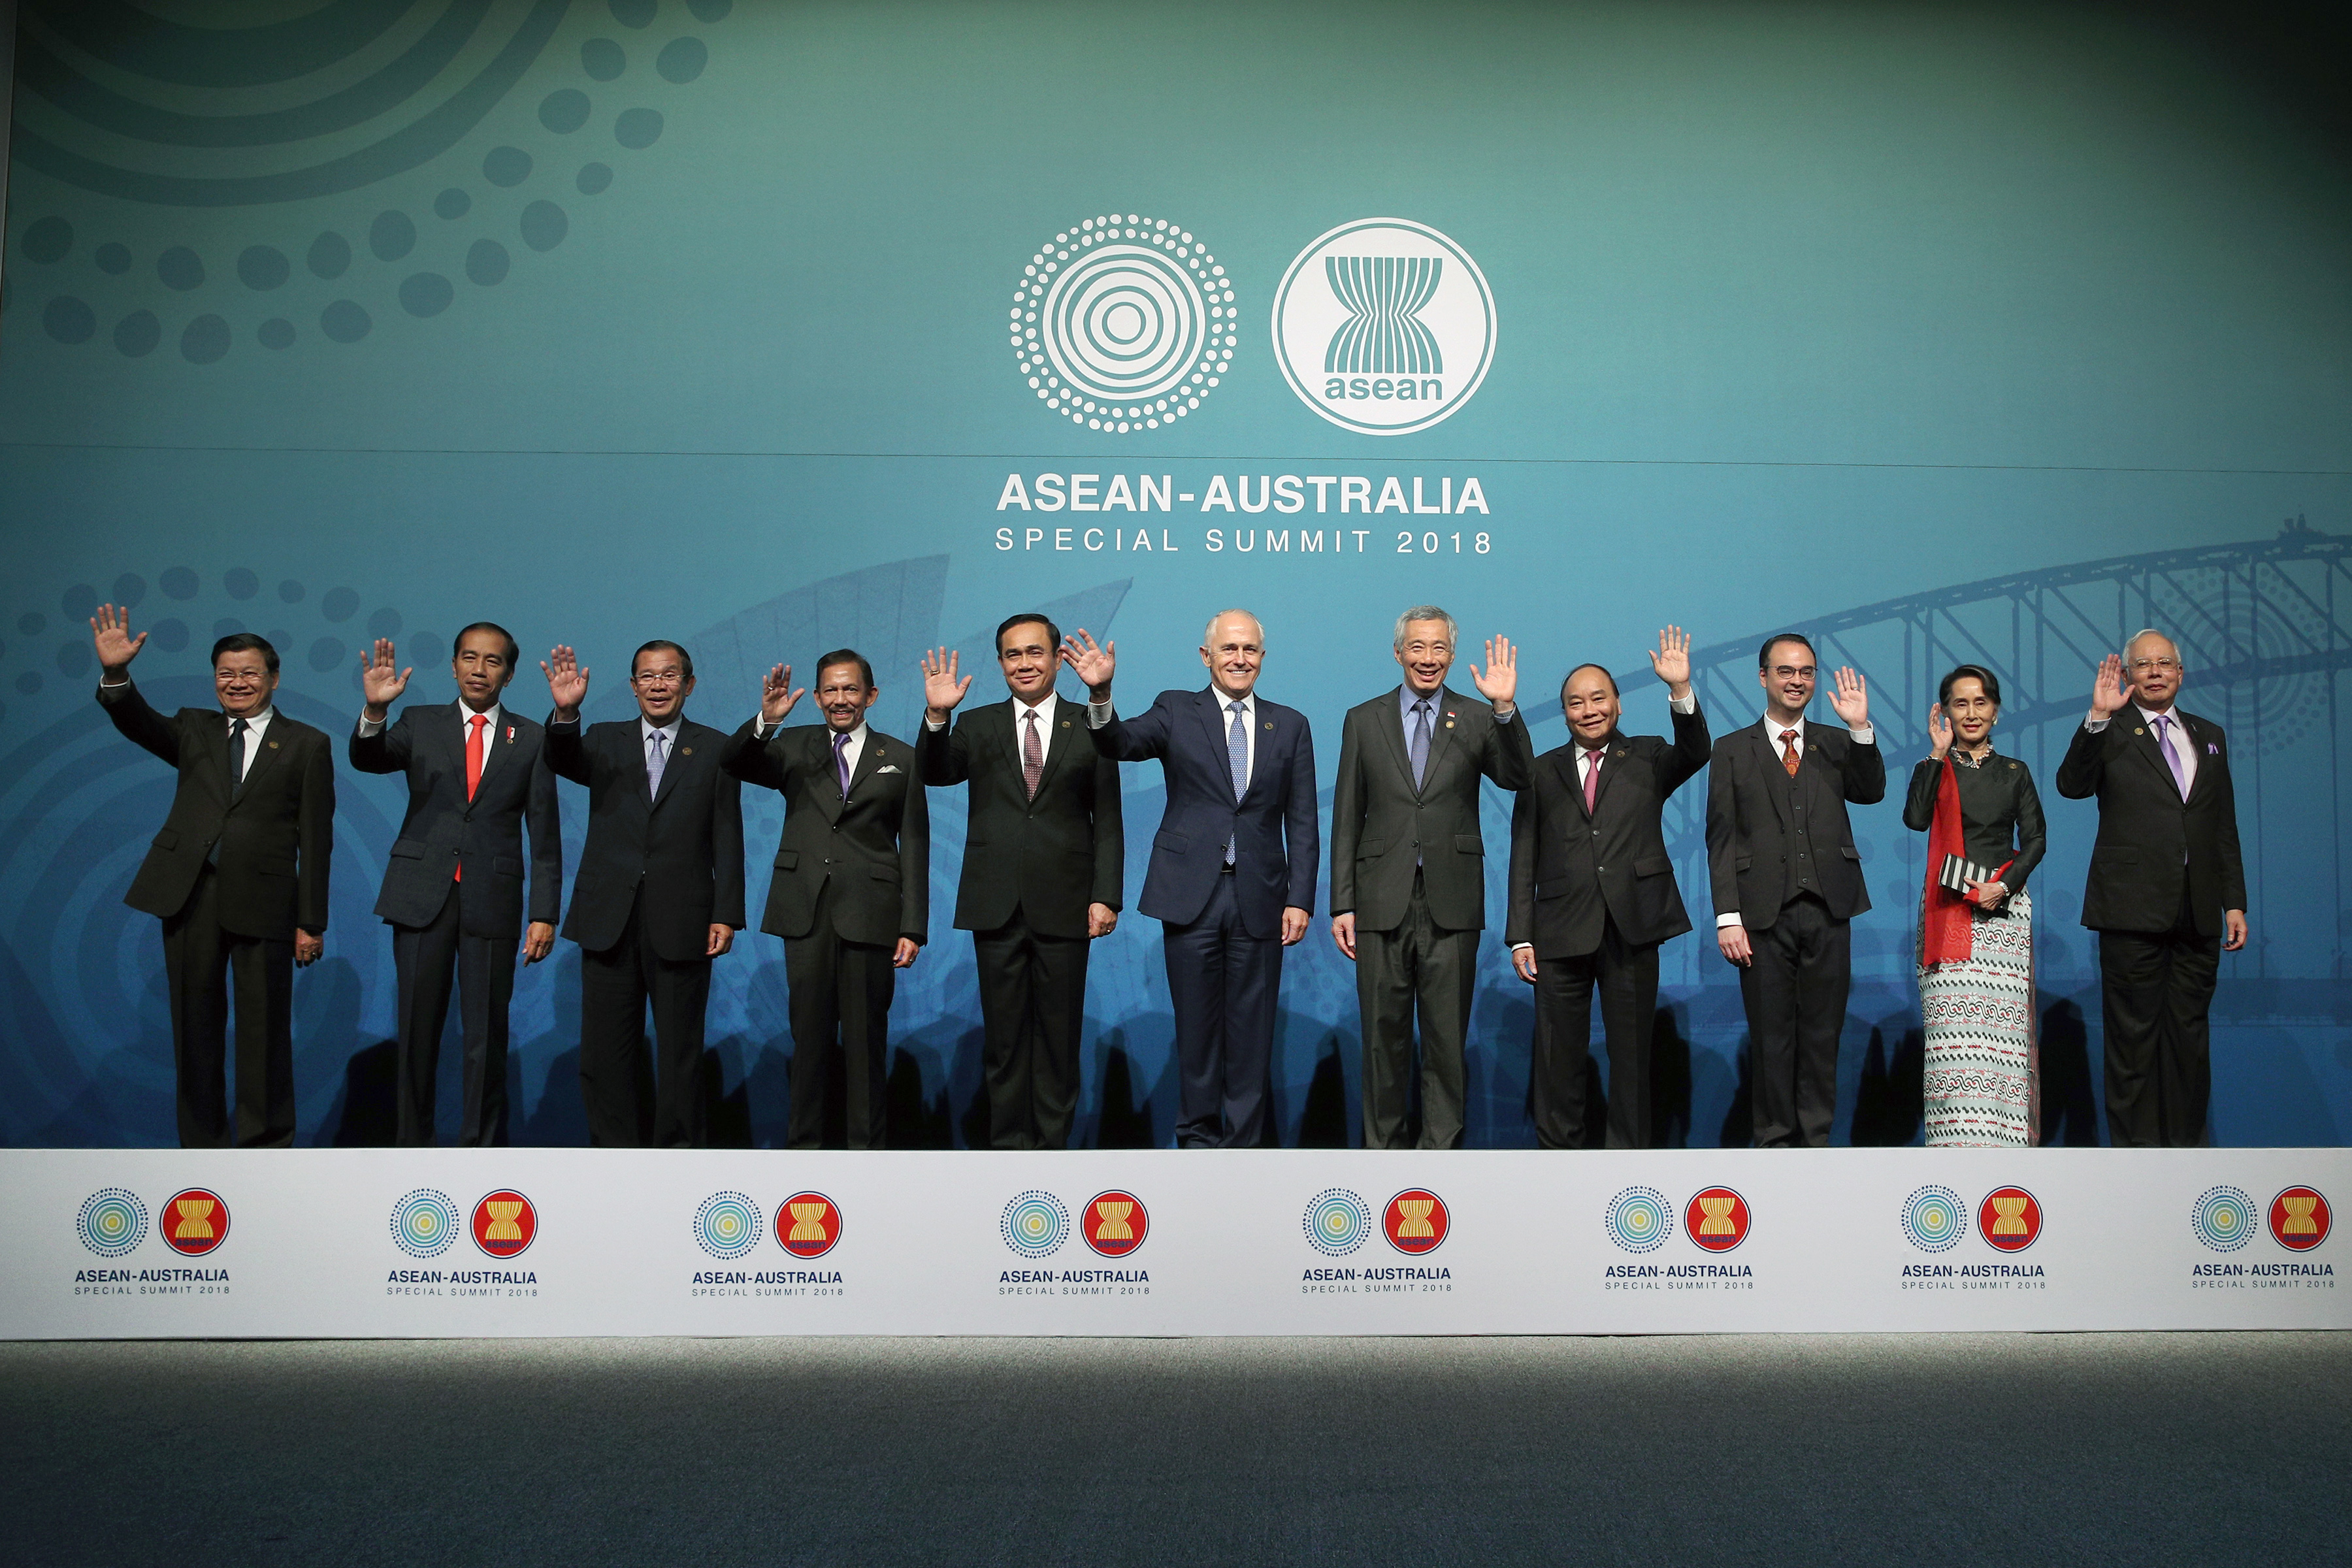 ASEAN-Australia Special Summit in March 2018 (MCI Photo by Chwee)